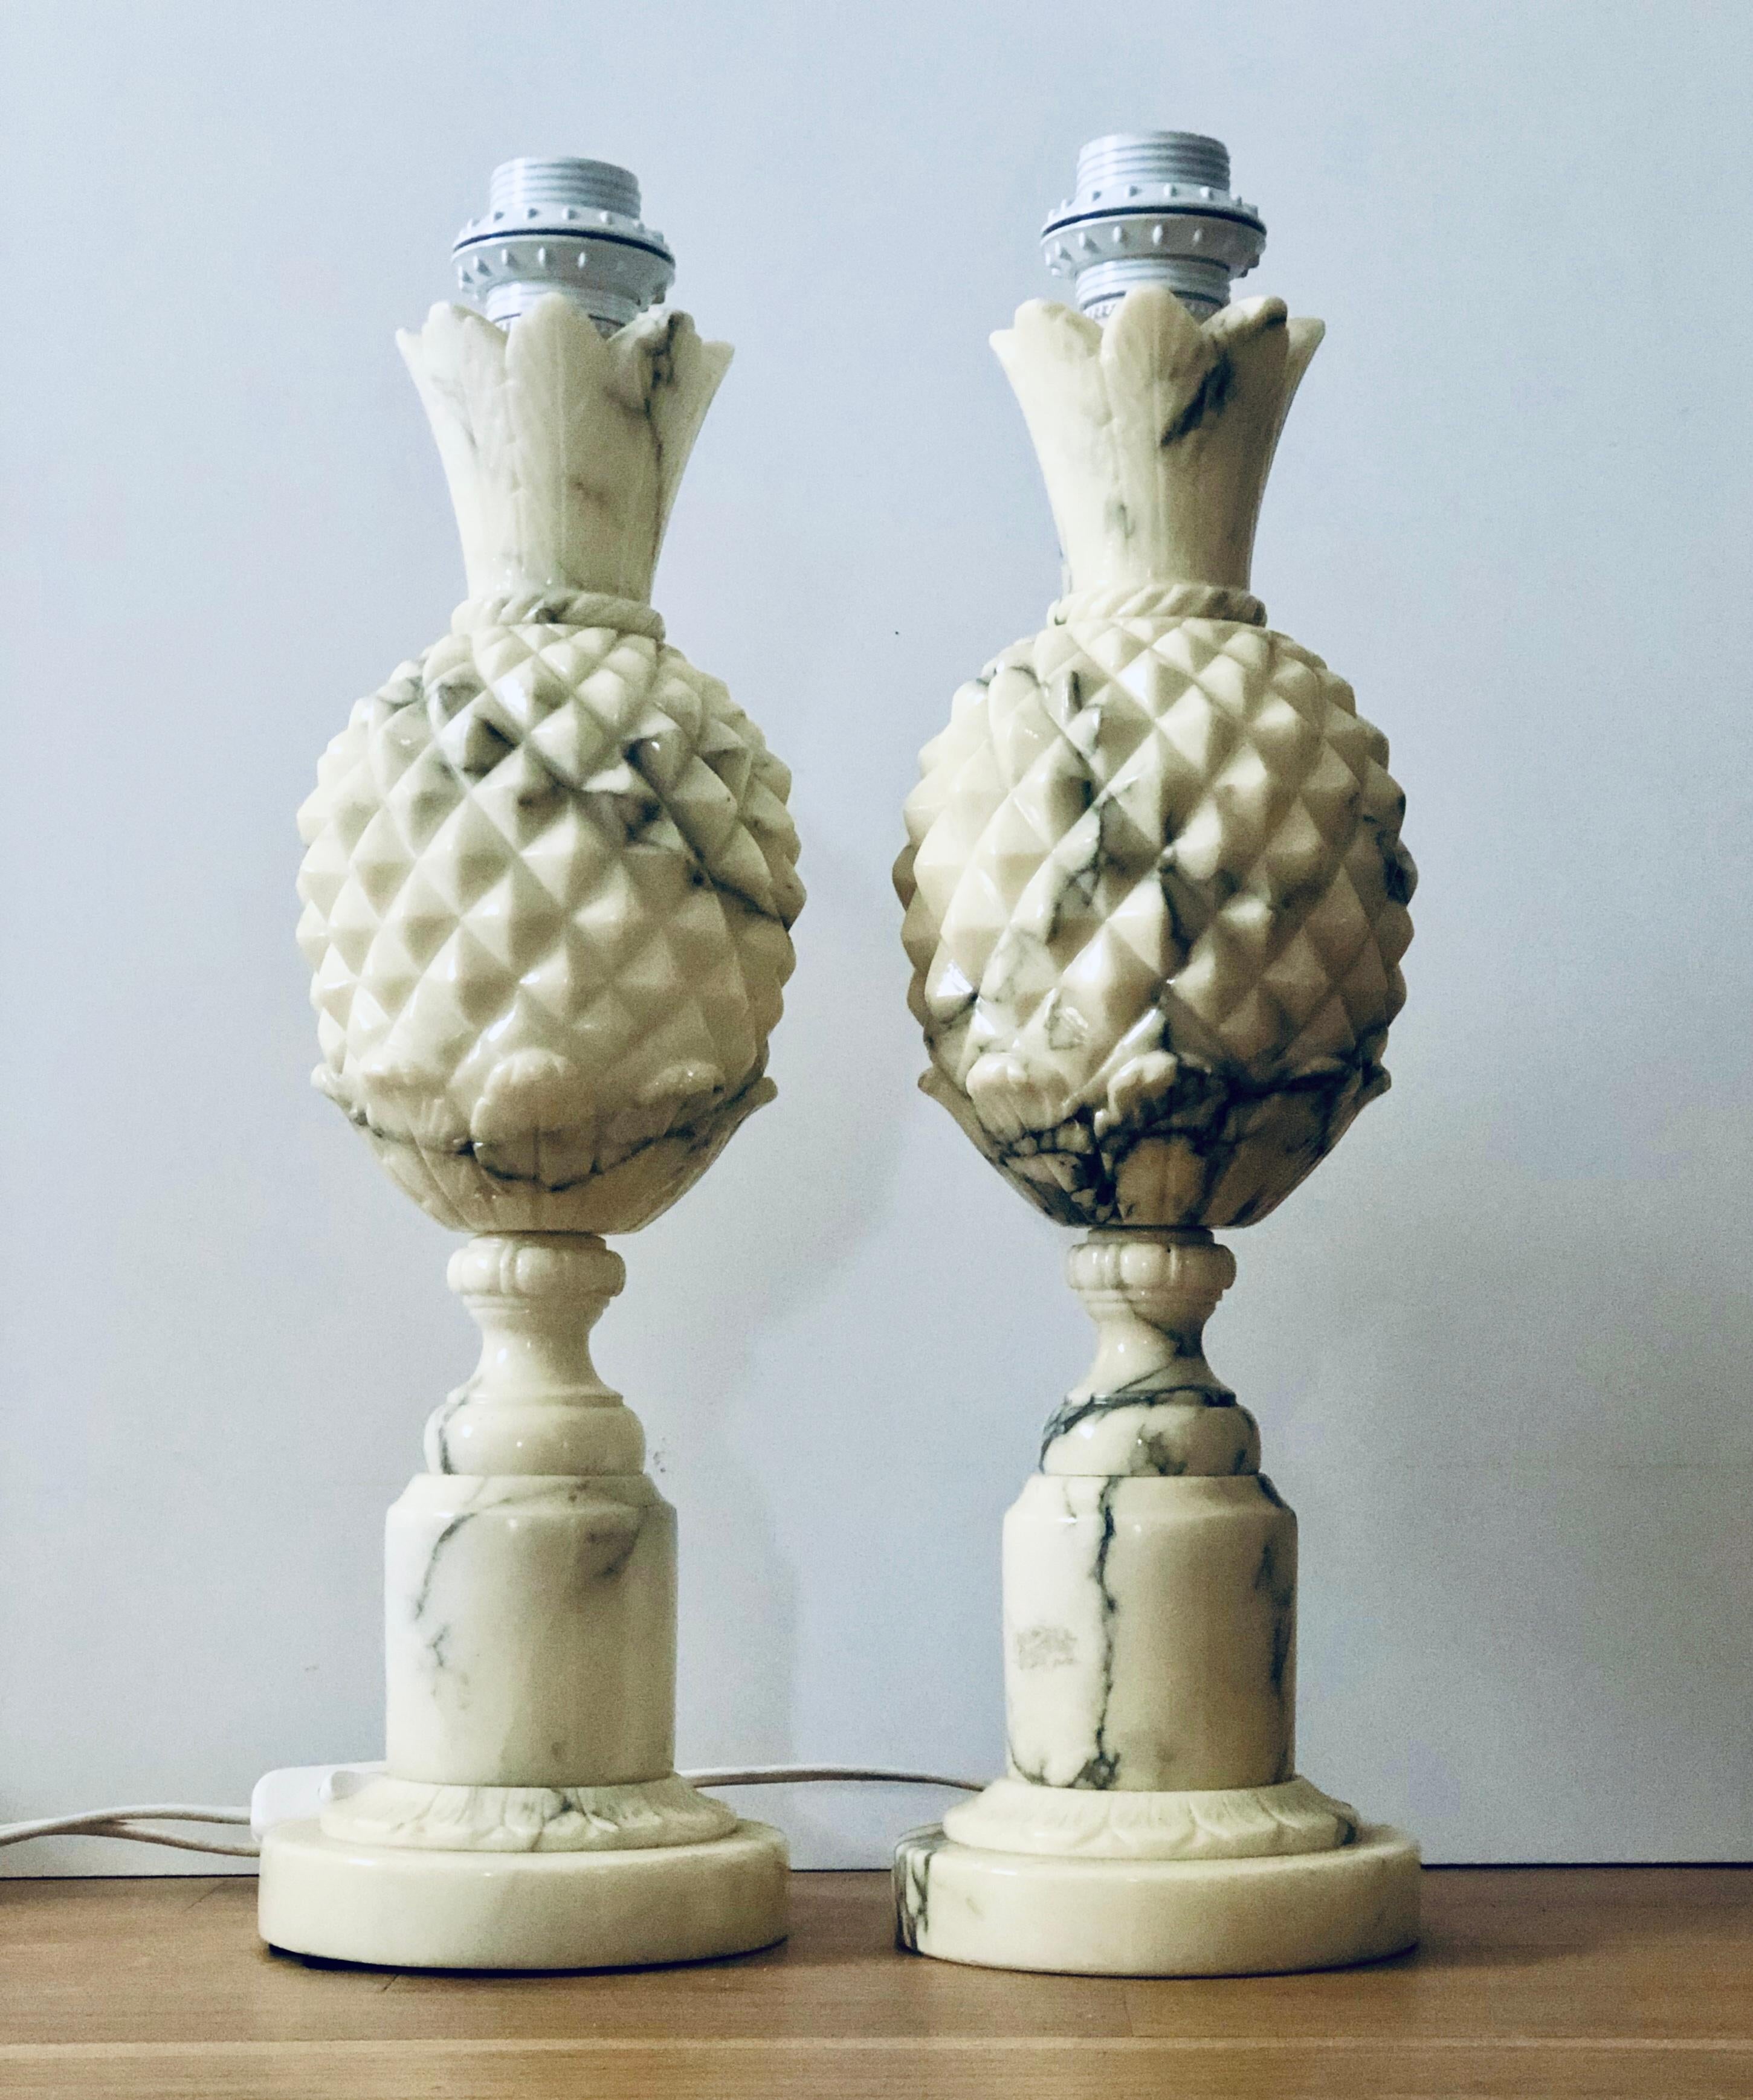 Pair of midcentury Italian table lamps. The lamps are made of marble stone carved in shape of pineapples and have a warm shade of white/grey marble. Good original vintage condition. Origin unknown. Lamps are wired with white cord with flat EU plugs.